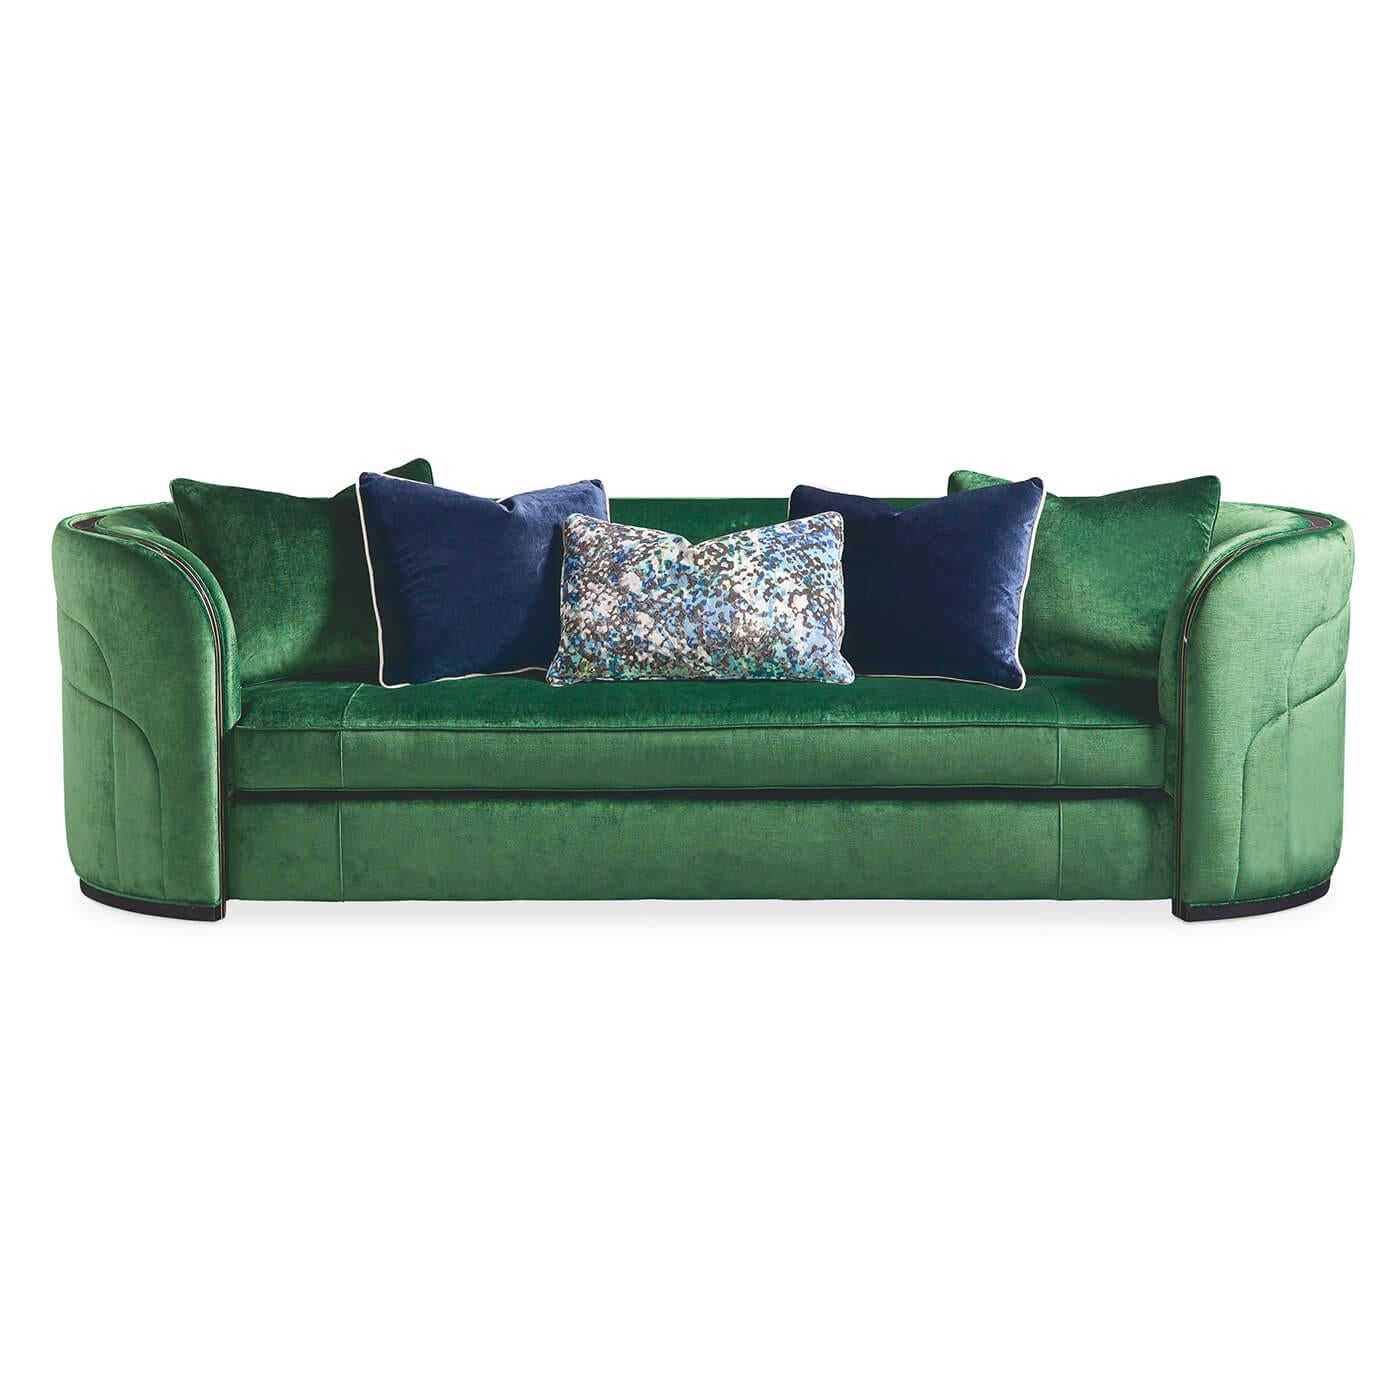 French Art Deco style emerald sofa. This sofa is glamour personified! Couture detail, a contemporary curving silhouette and fashionable upholstery define this eye-catching sofa. It's upholstered in vibrant emerald green velvet with plush pillows in